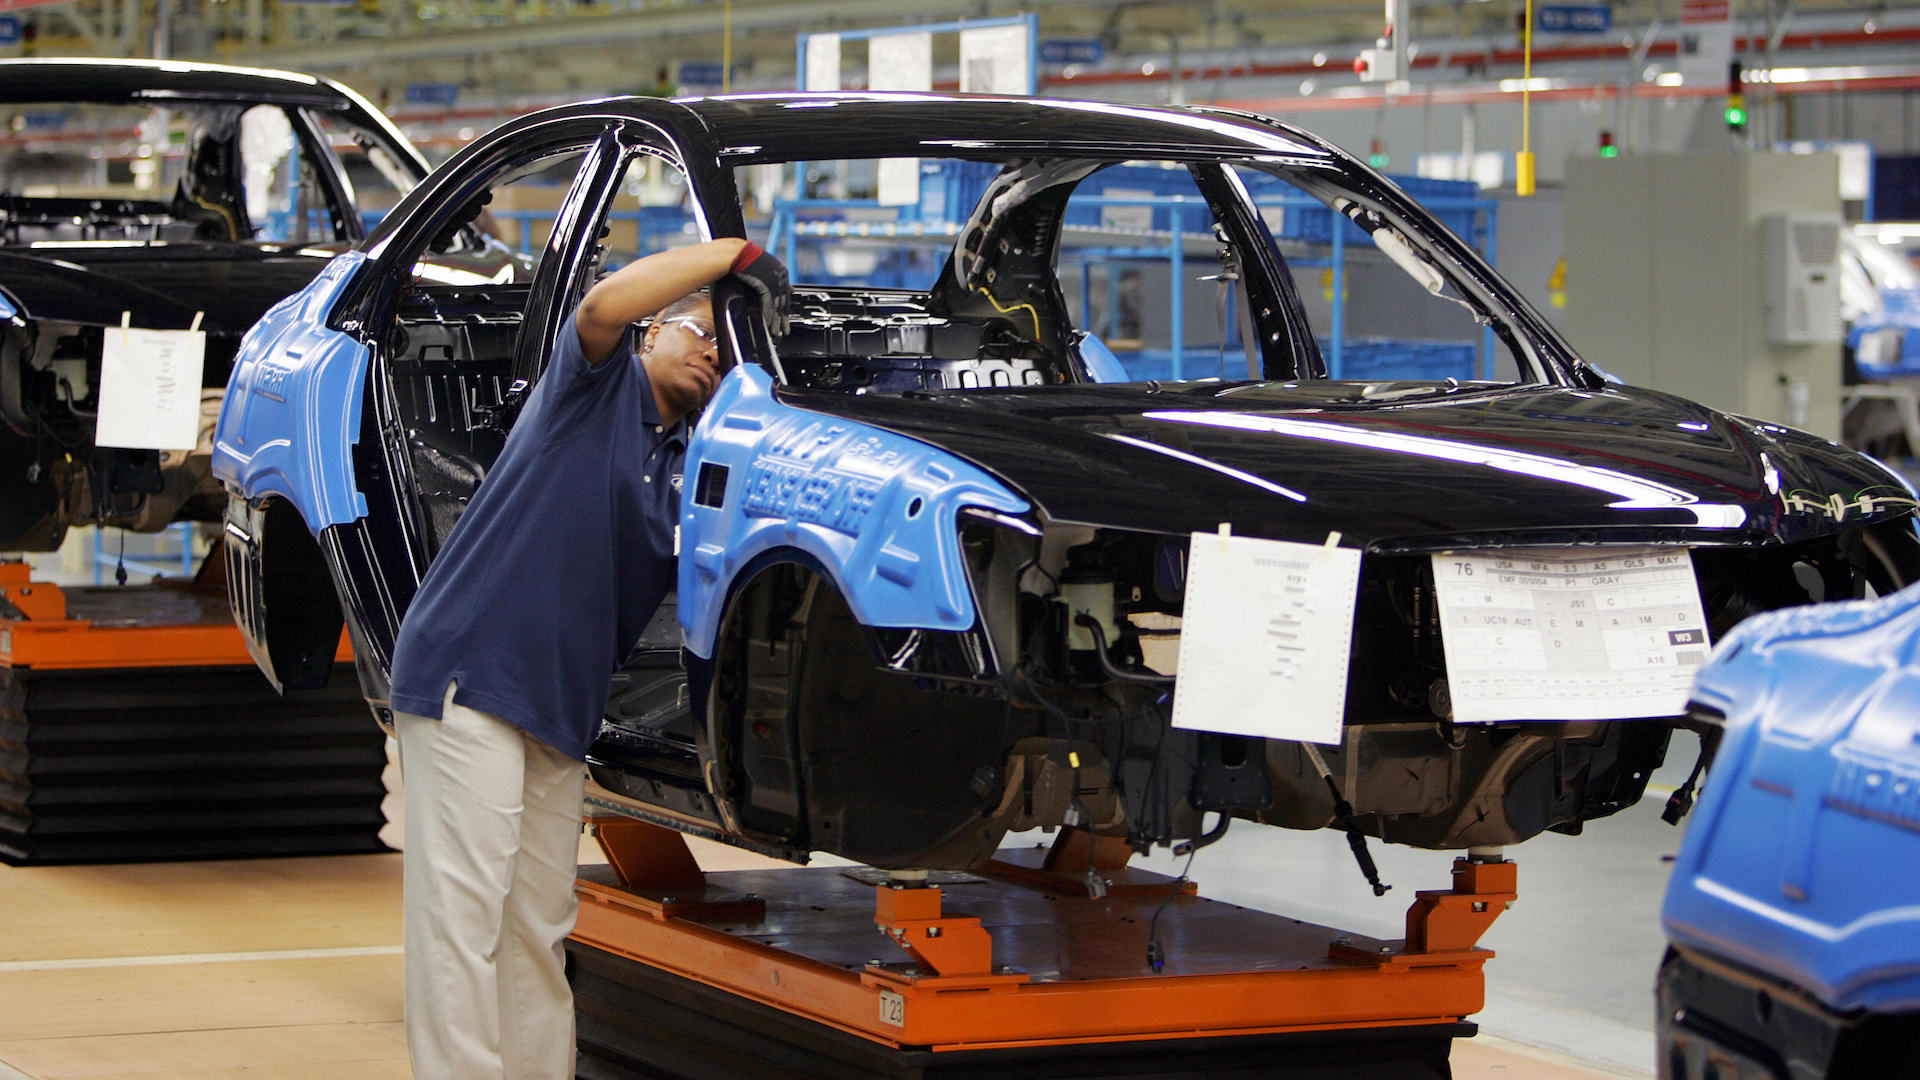 MONTGOMERY, UNITED STATES:  Hyundai employees work on a car on the assembly line 20 May 2005 during the grand opening of their plant in Montgomery, AL. This is the South Korean car manufacturers first production plant in the US, capable of producing 300,000 cars a year.  AFP PHOTO/ROBERT SULLIVAN  (Photo credit should read ROBERT SULLIVAN/AFP via Getty Images)